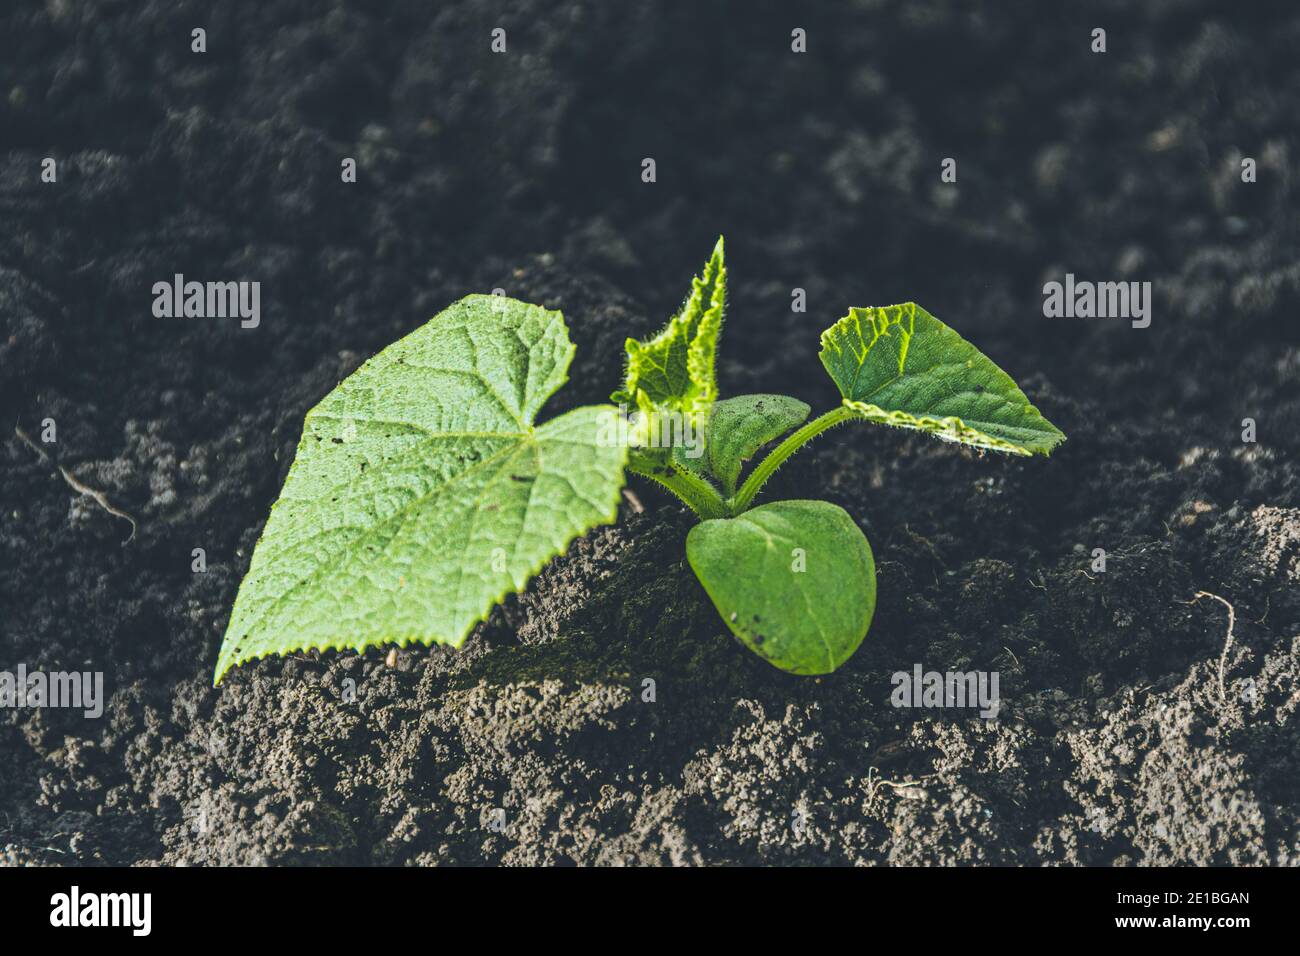 Young shoots with green cucumber leaves on farm. Growing vegetables in garden. Stock Photo